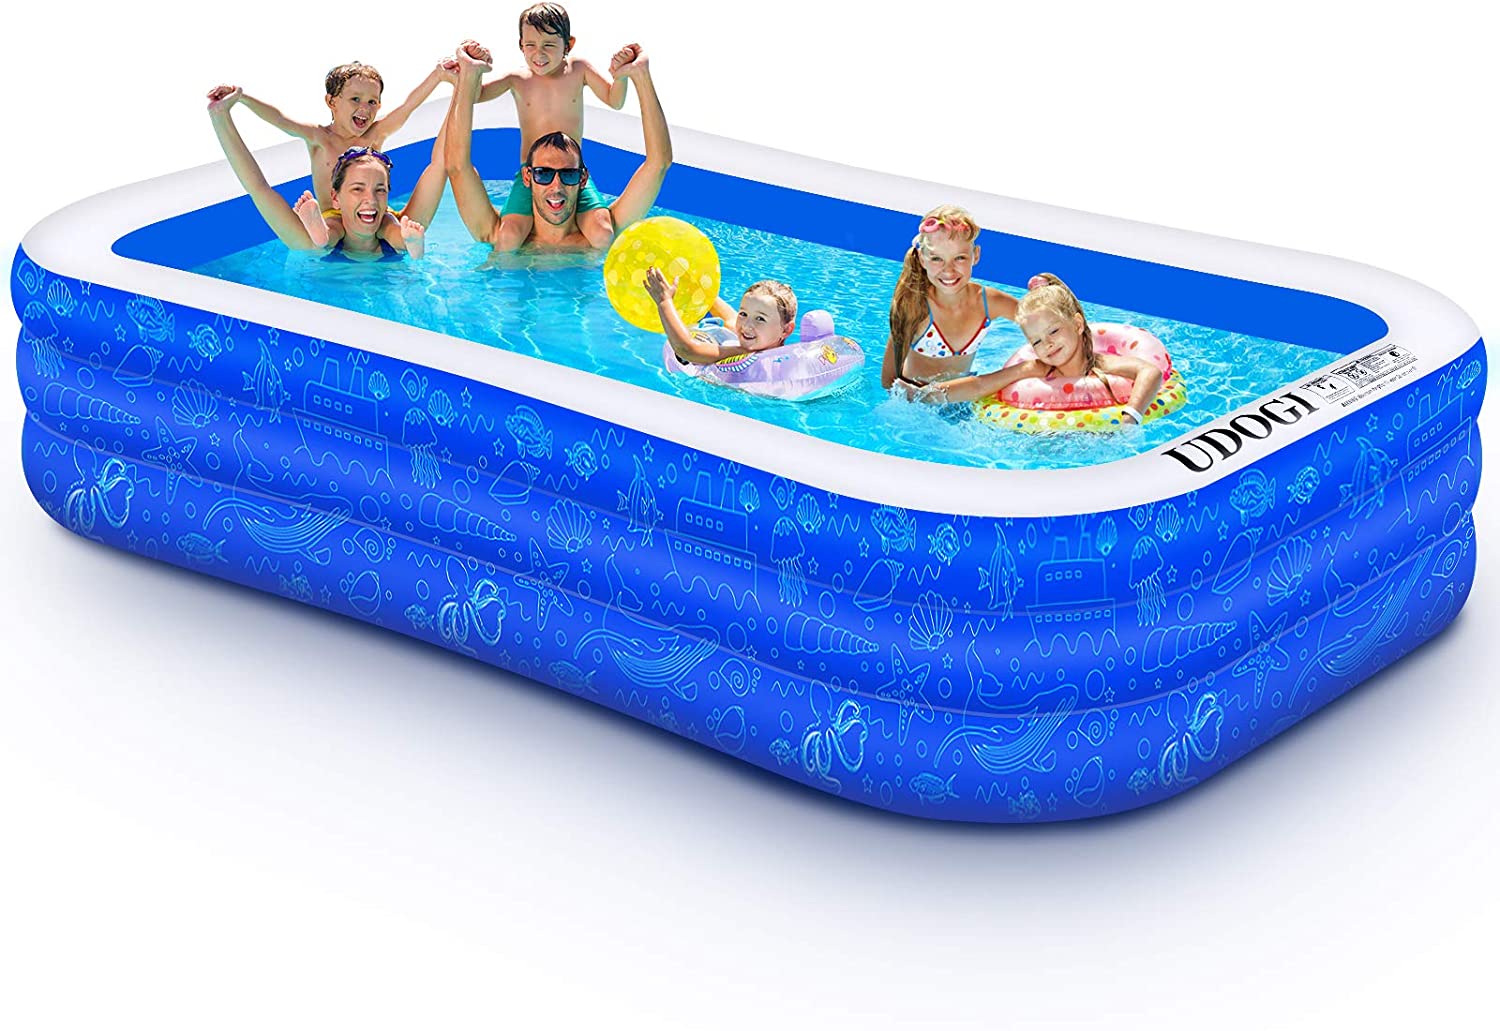 Adults No Filter iWINTOP 【FedEx Arrives Within 6-8 Days】 10 FT Family Swimming Pools Above Ground for Backyard/Outside Portable Inflatable Top Ring Swimming Pools for 2-6 Kids 